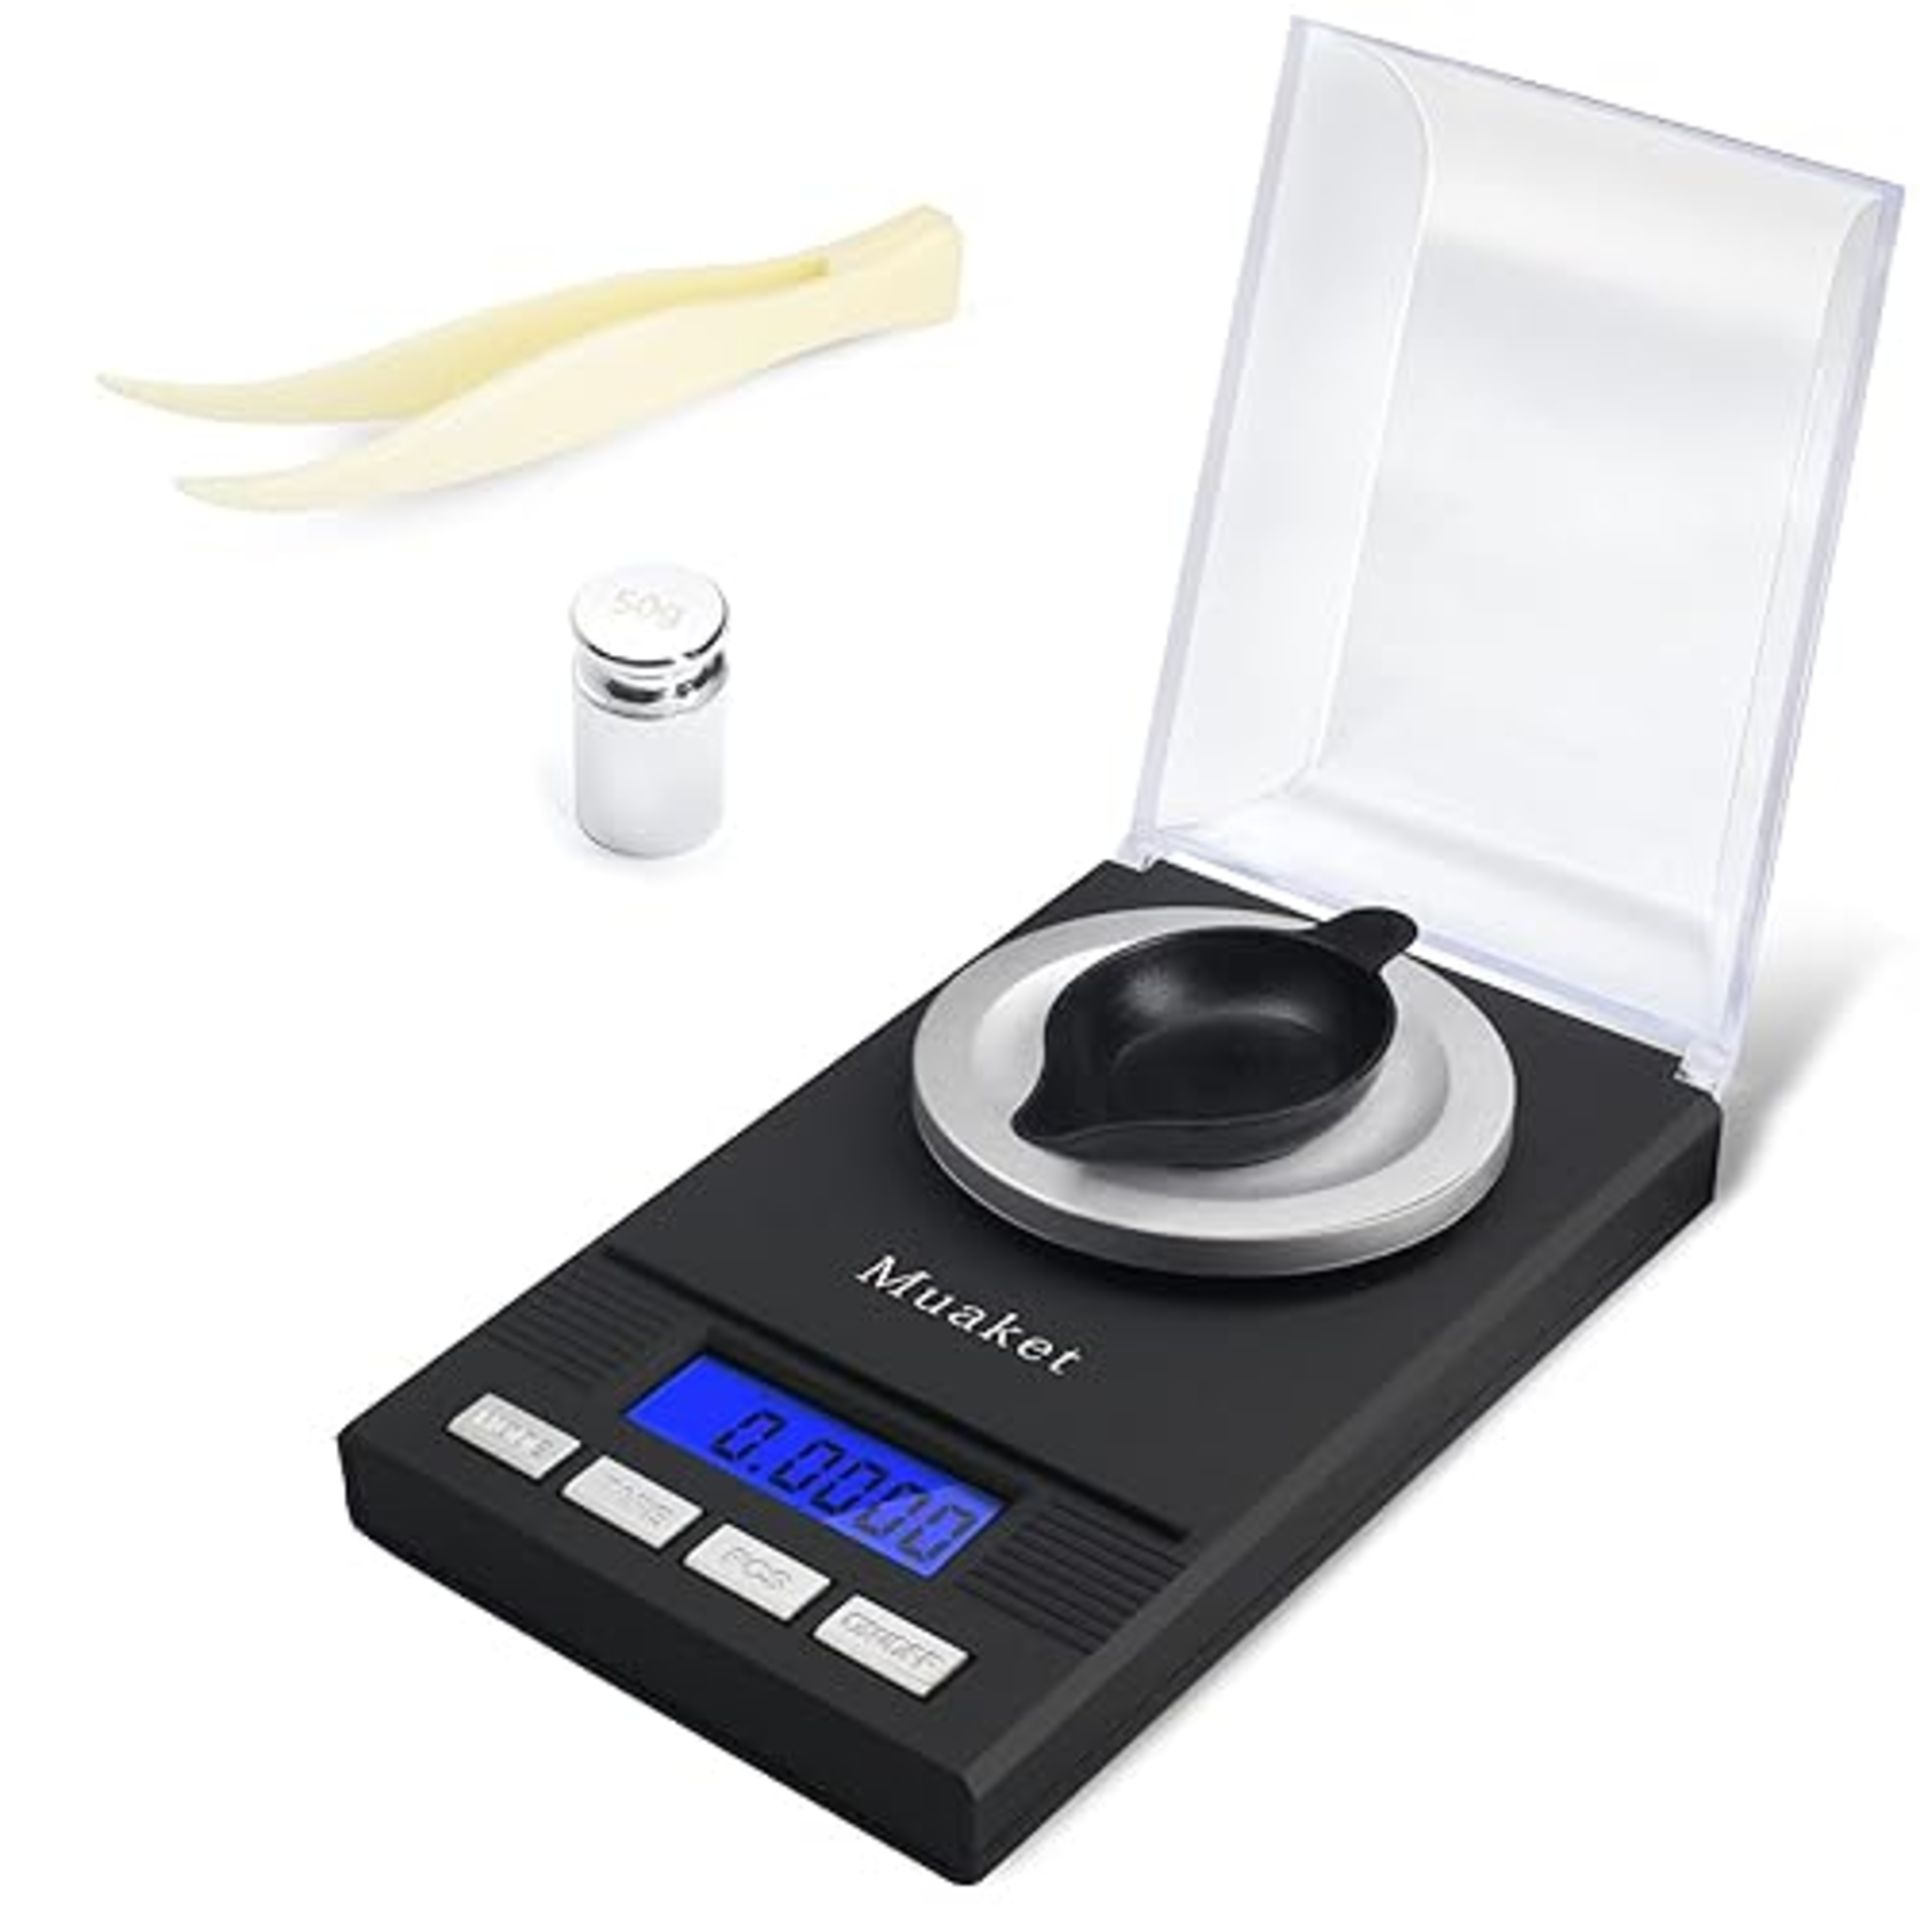 Digital Milligram Scales 0.001G/50G, Muaket Mini Kitchen Scales With LCD Display, High Precision...